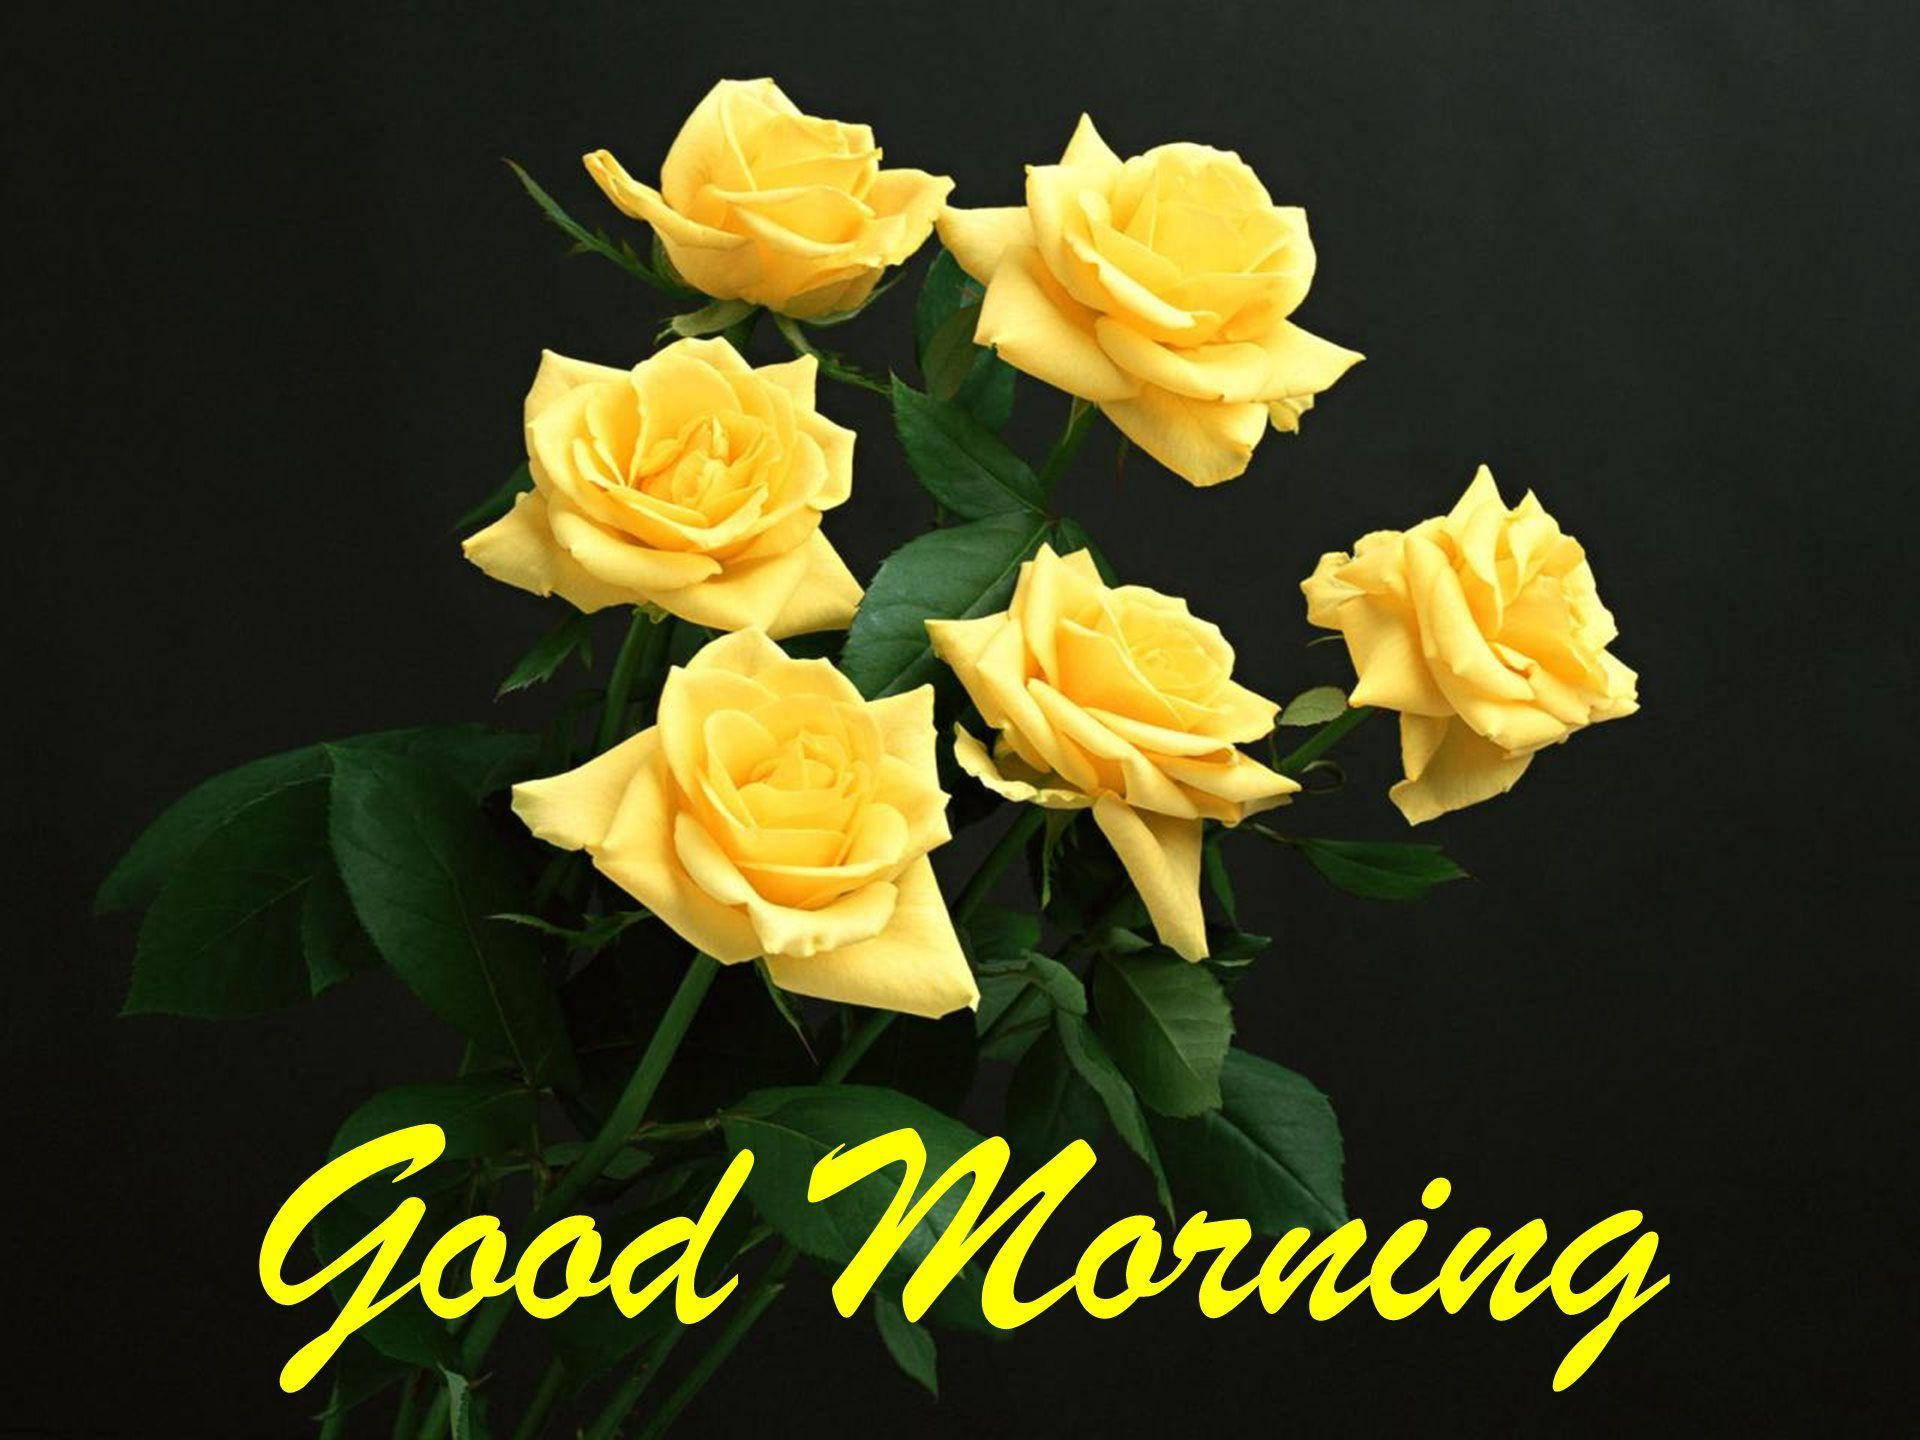 Good Morning HD With Yellow Roses Wallpaper